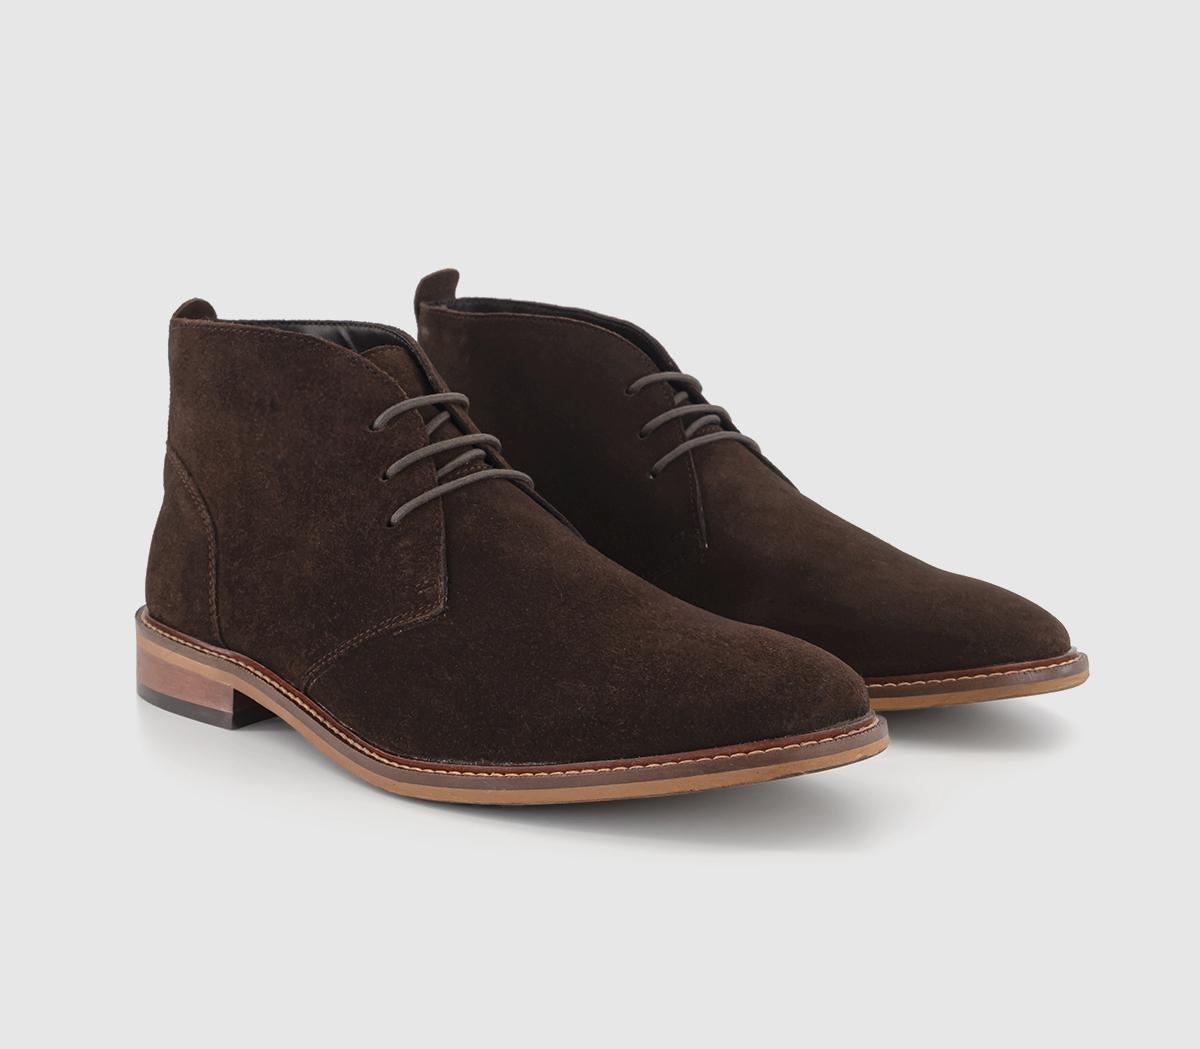 OFFICE Mens Beachcombe Chukka Boots Chocolate Suede Brown, 7